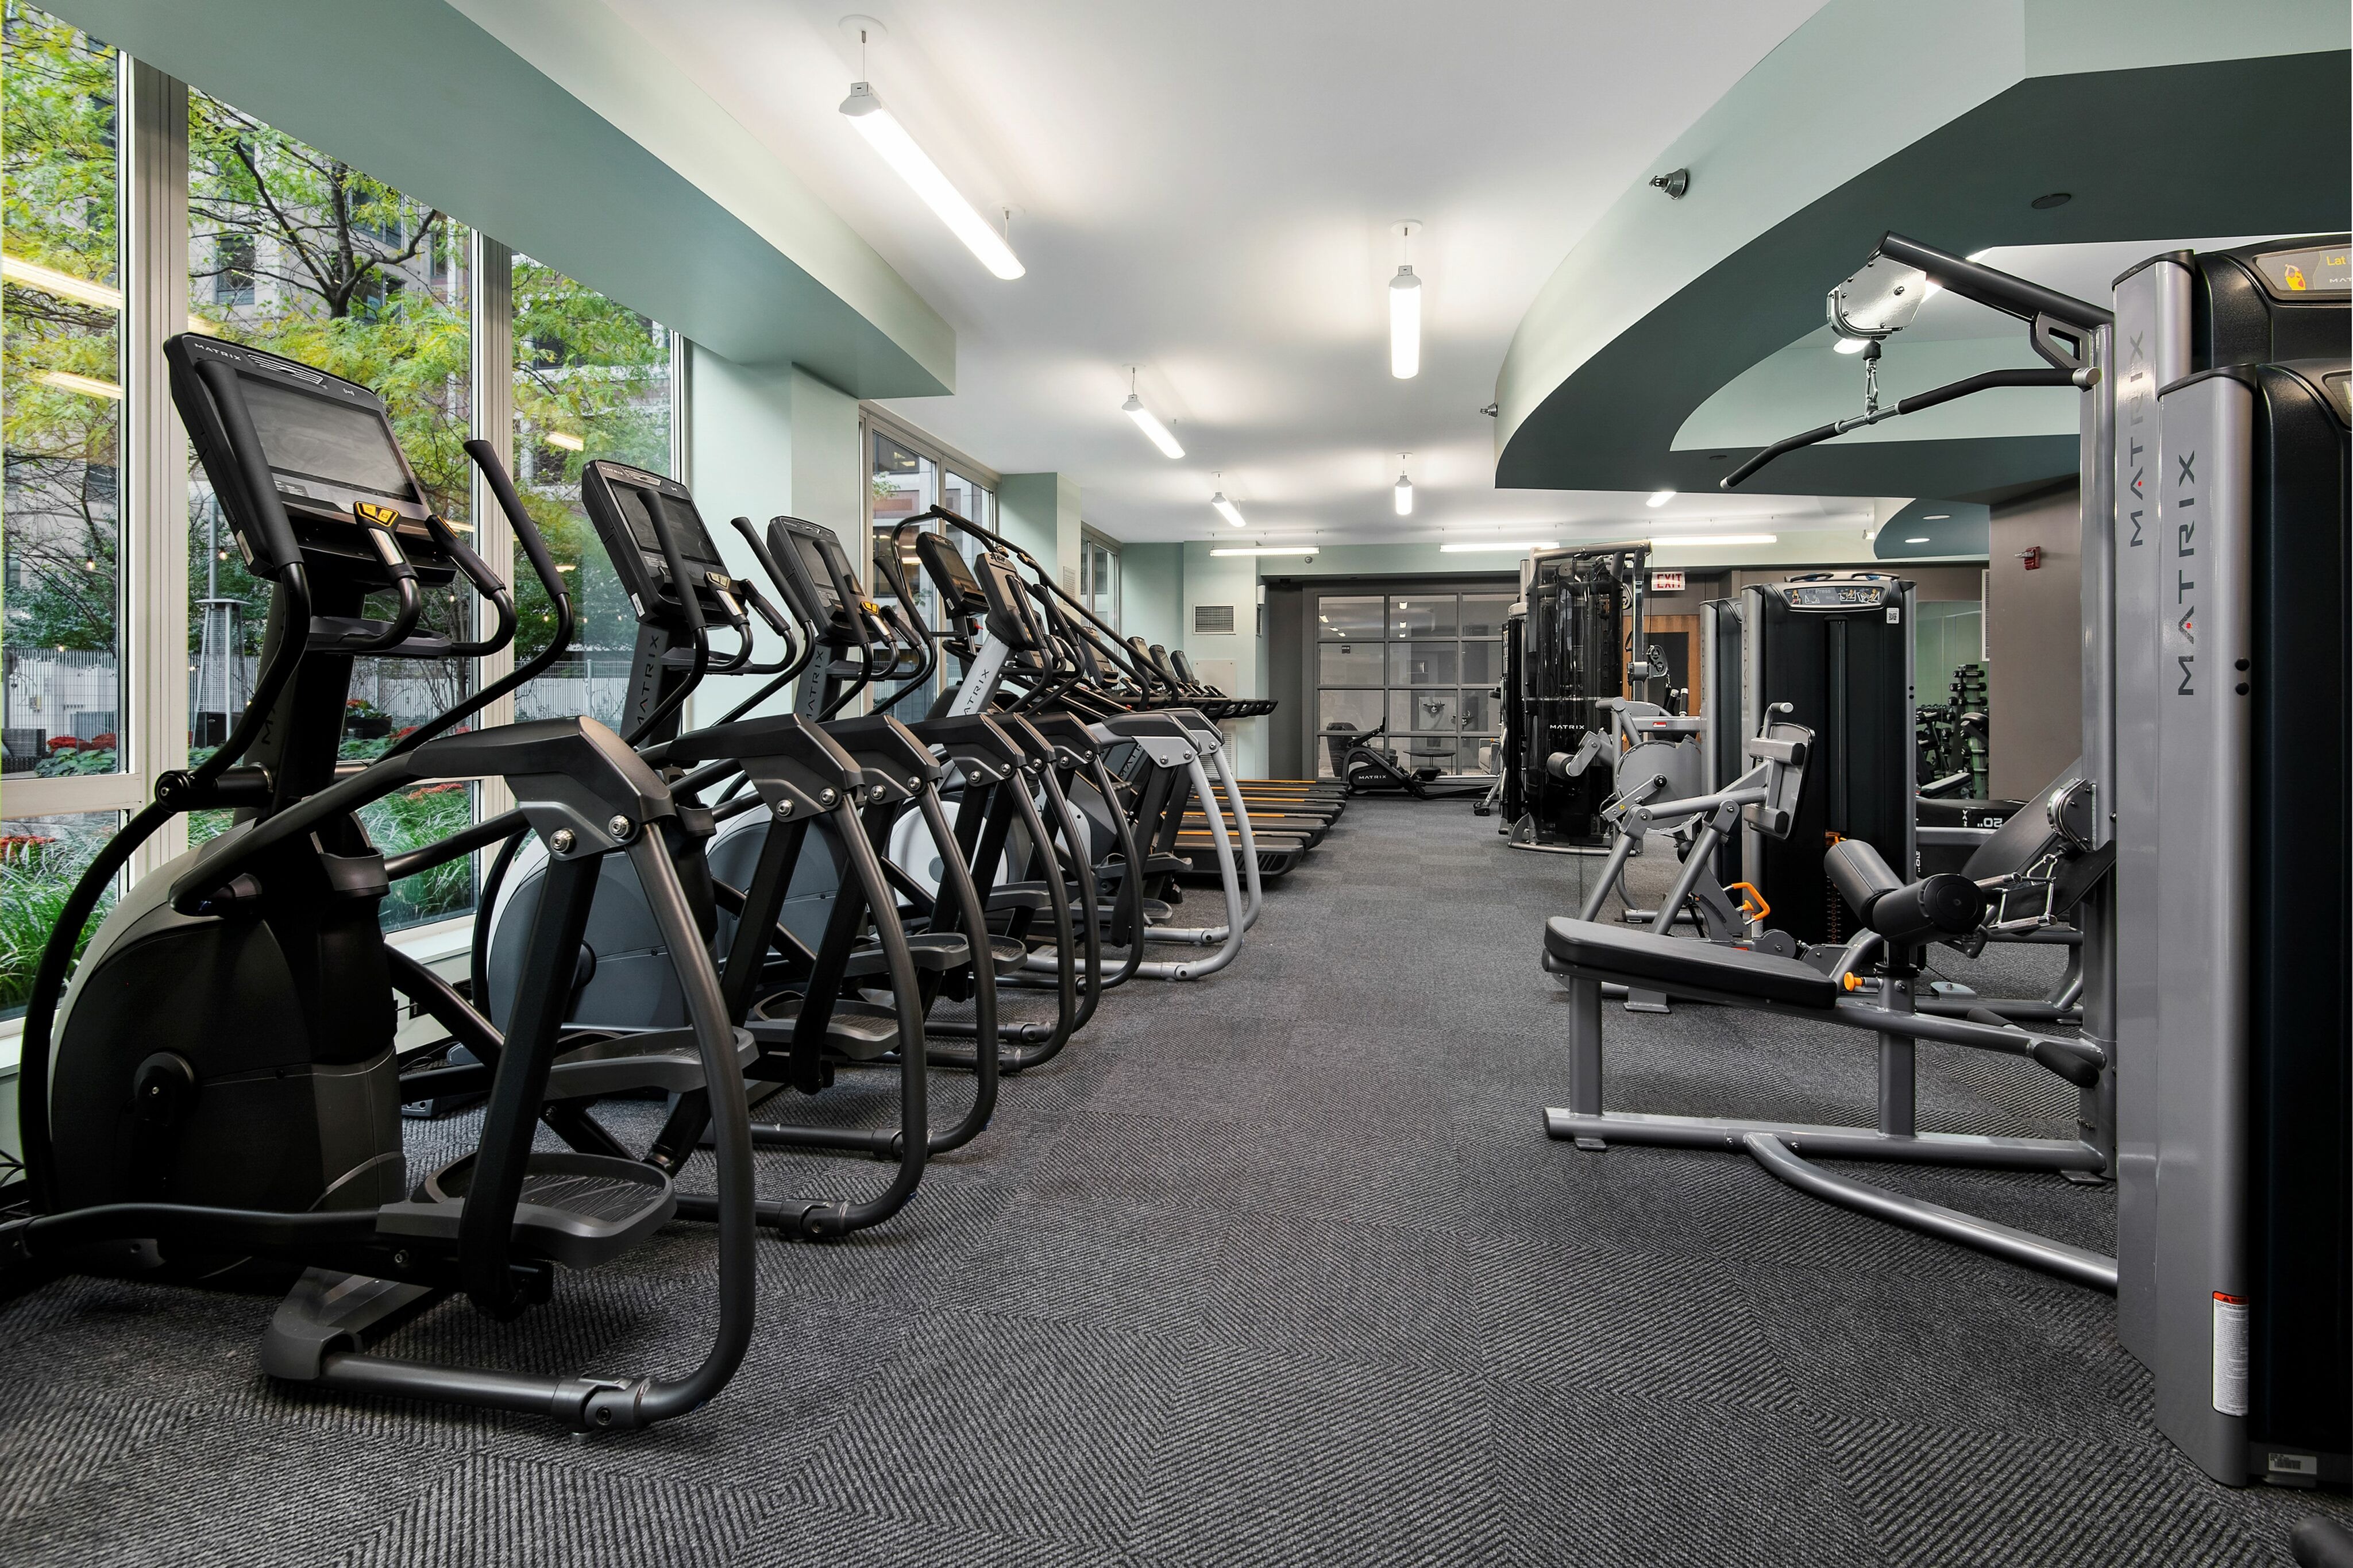 Gym equipment in the 24-hour fitness club